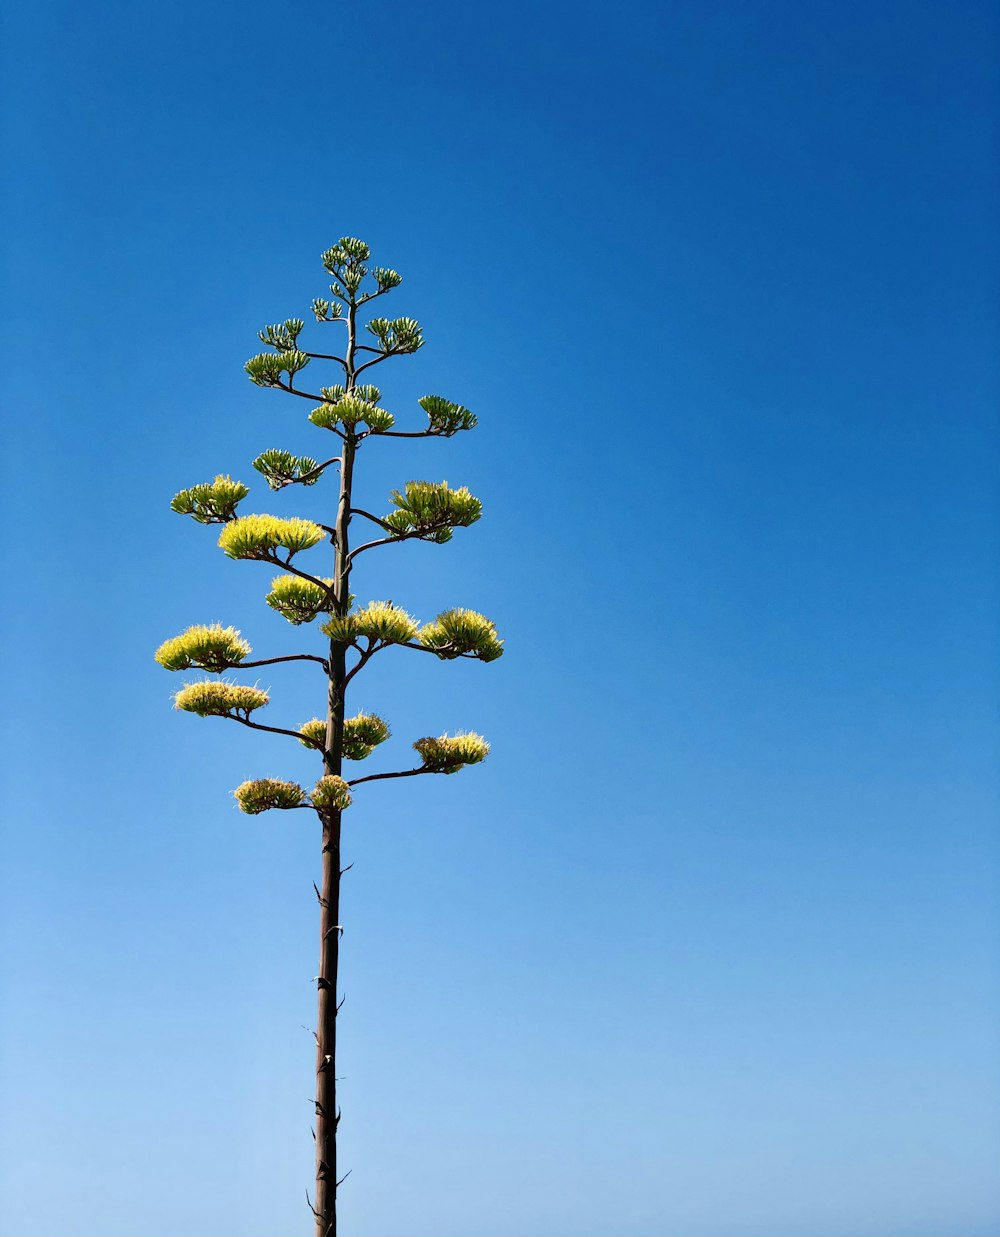 yellow flowers on brown wooden stick under blue sky during daytime